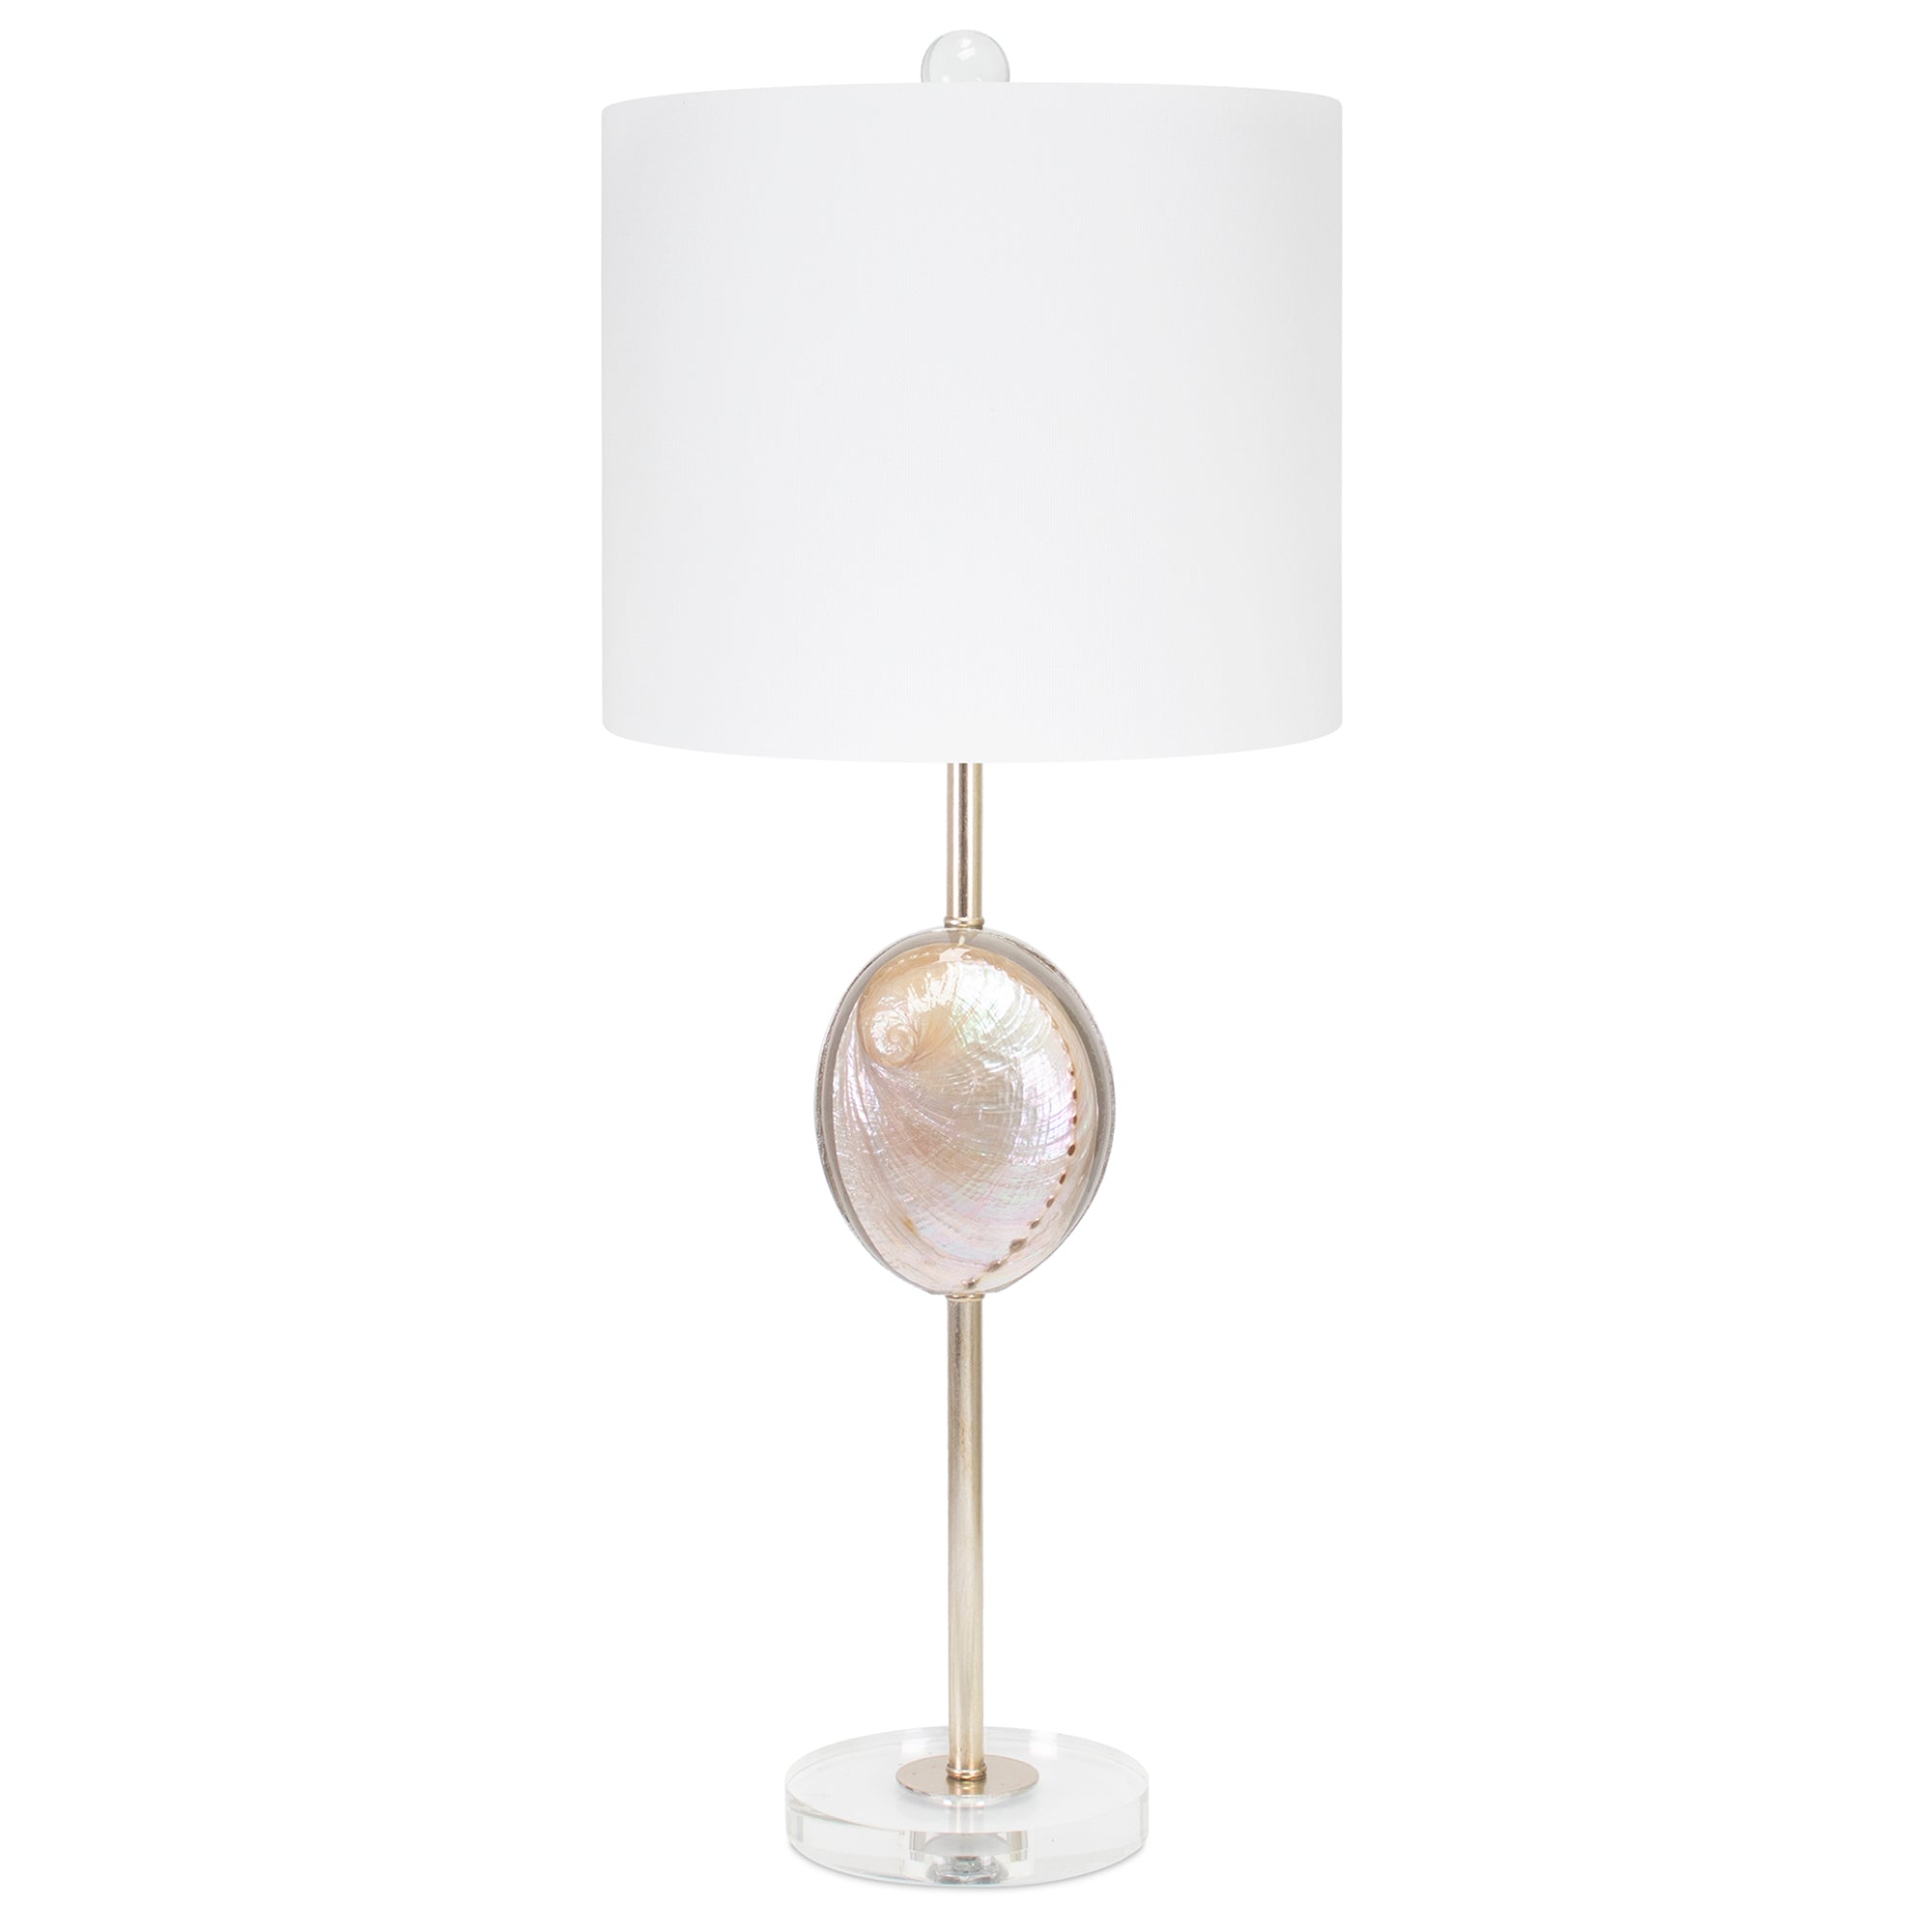 Eastport Lamp with 12x12x10 White Crisp Shade - Couture Lamps